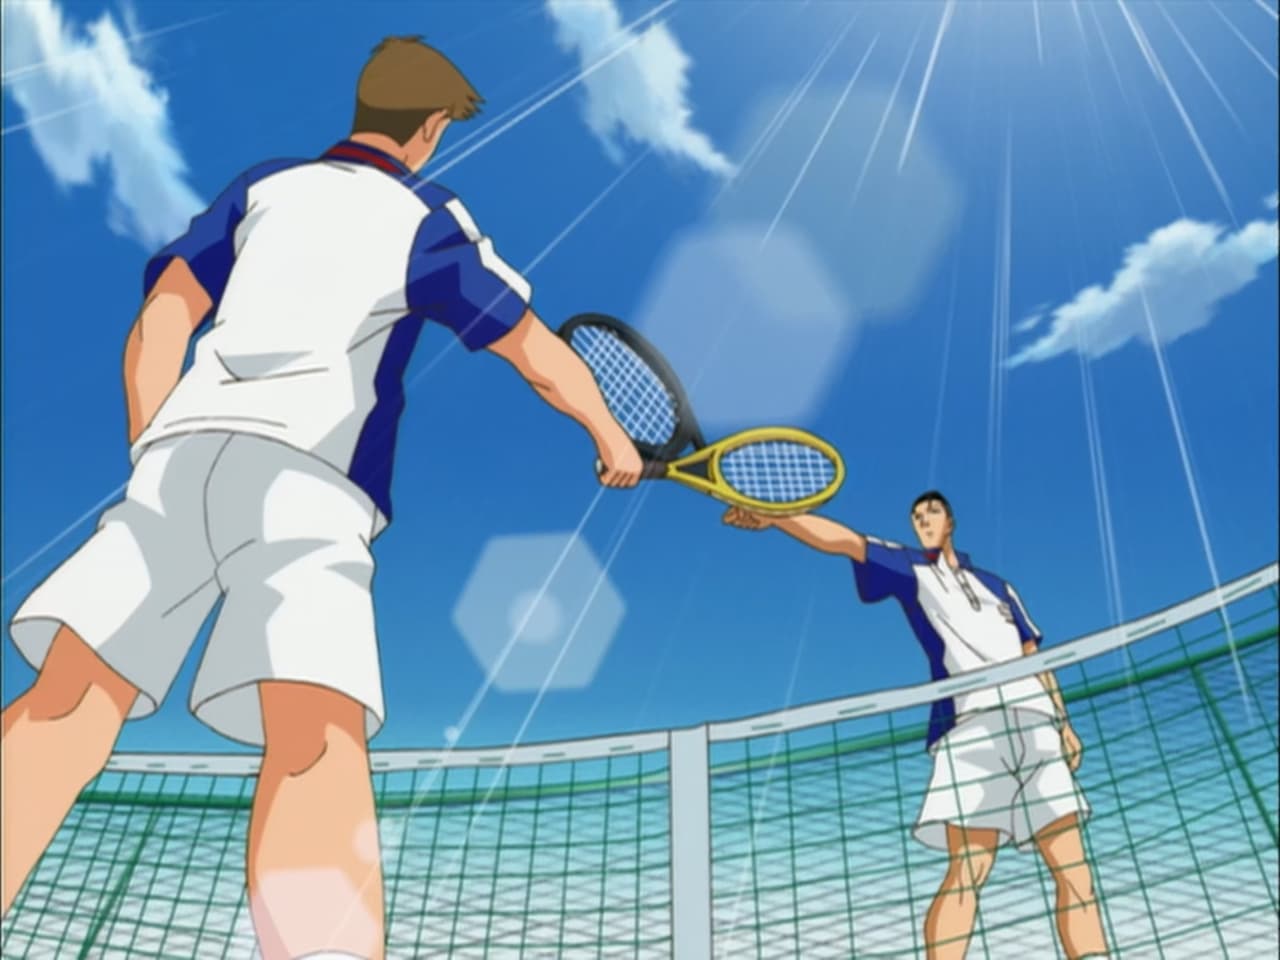 Seigaku in the Spotlight Once Again